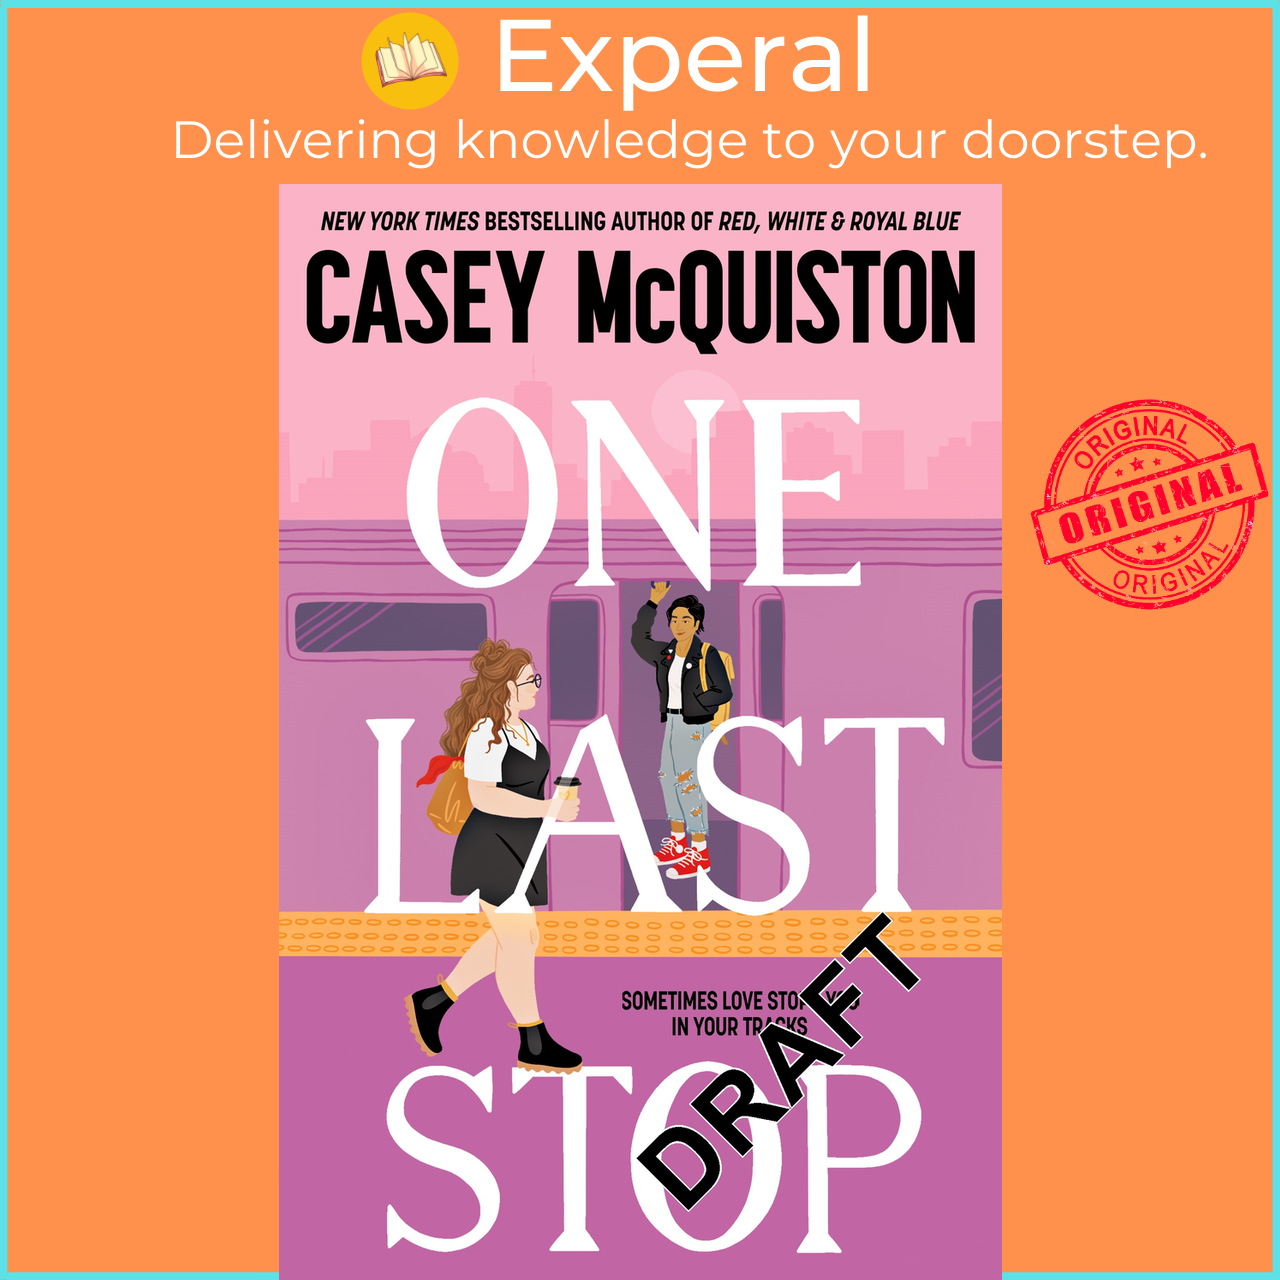 Sách - One Last Stop by Casey McQuiston (UK edition, paperback)